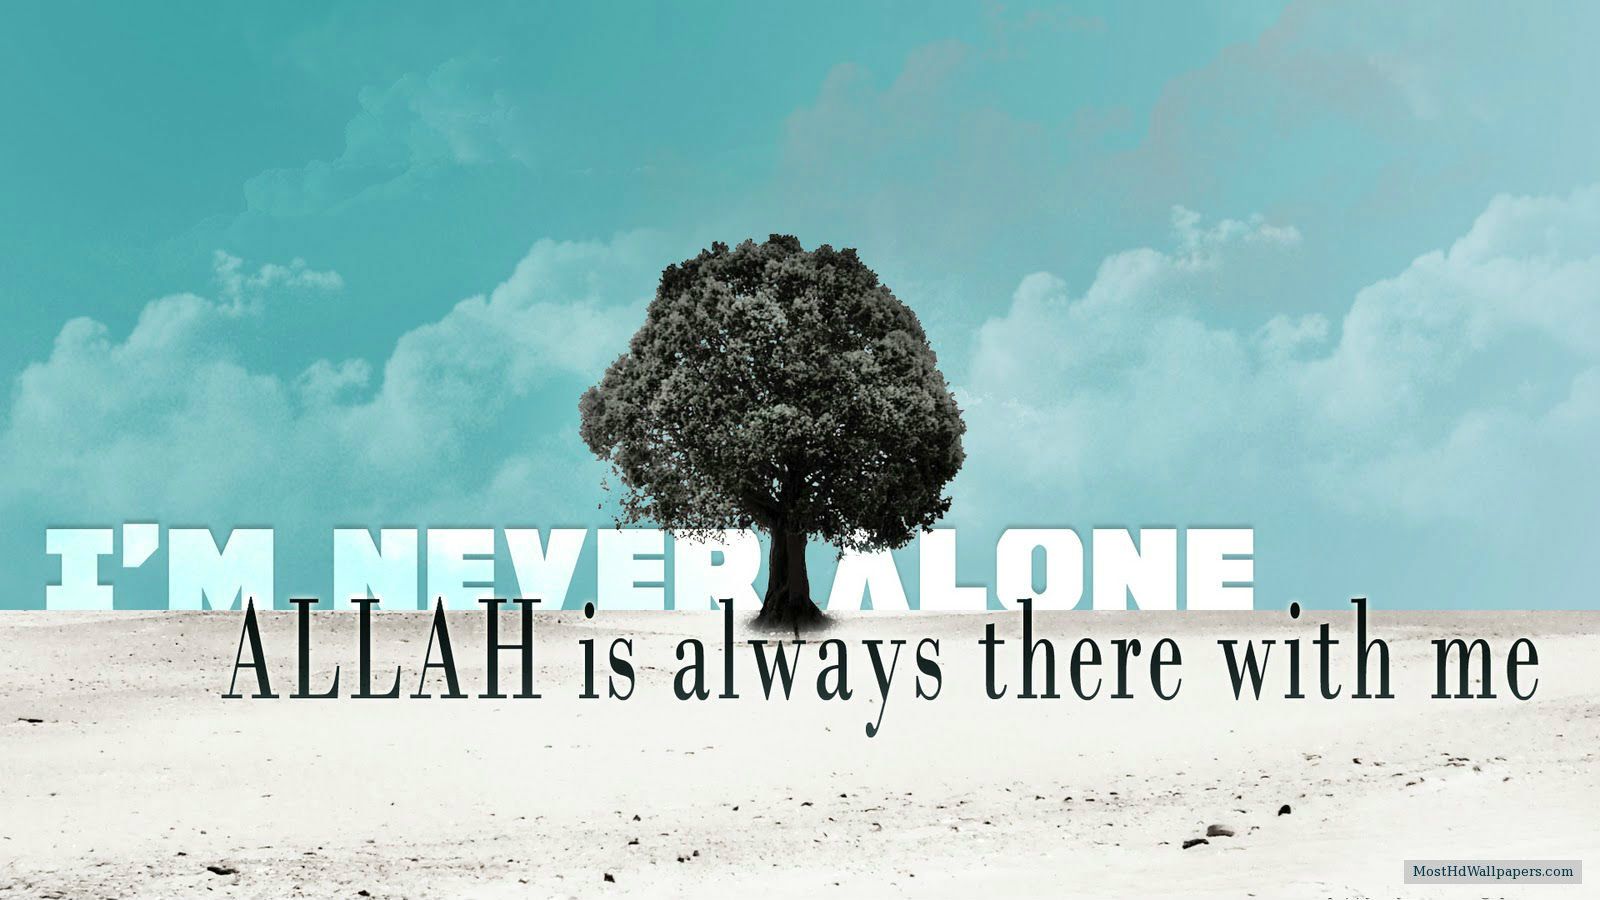 Islamic Wallpaper with Quotes